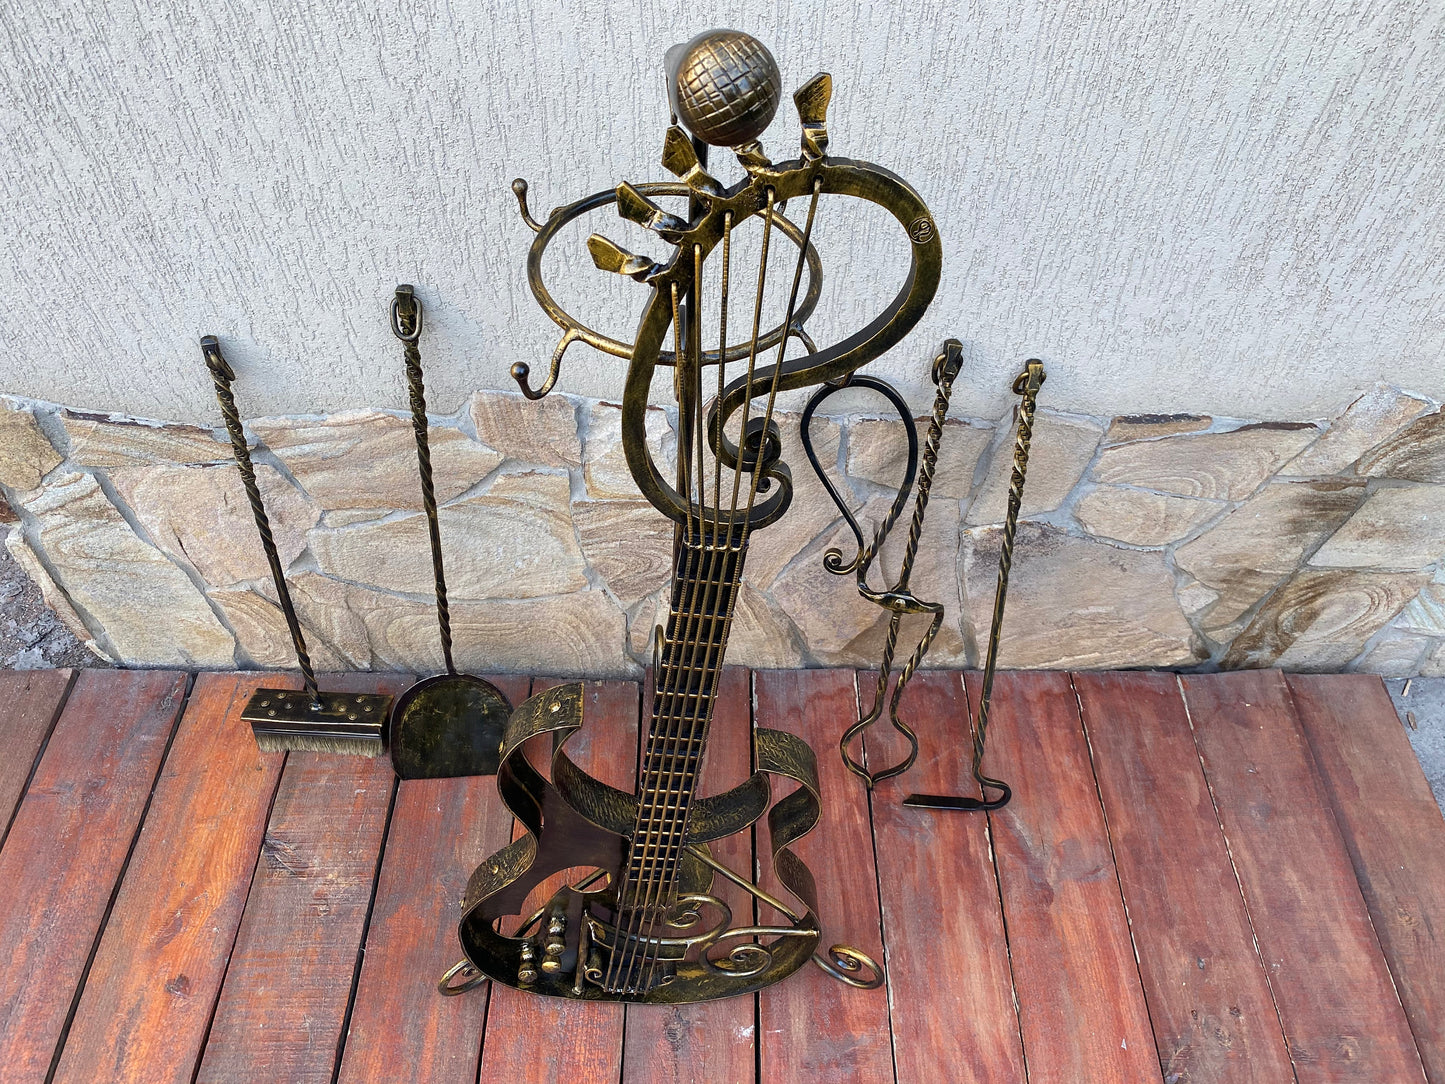 Fireplace tools, fire poker, fireplace decor, guitar, fireplace, music gift, iron gift, anniversary gift, birthday gift, music lover, axe